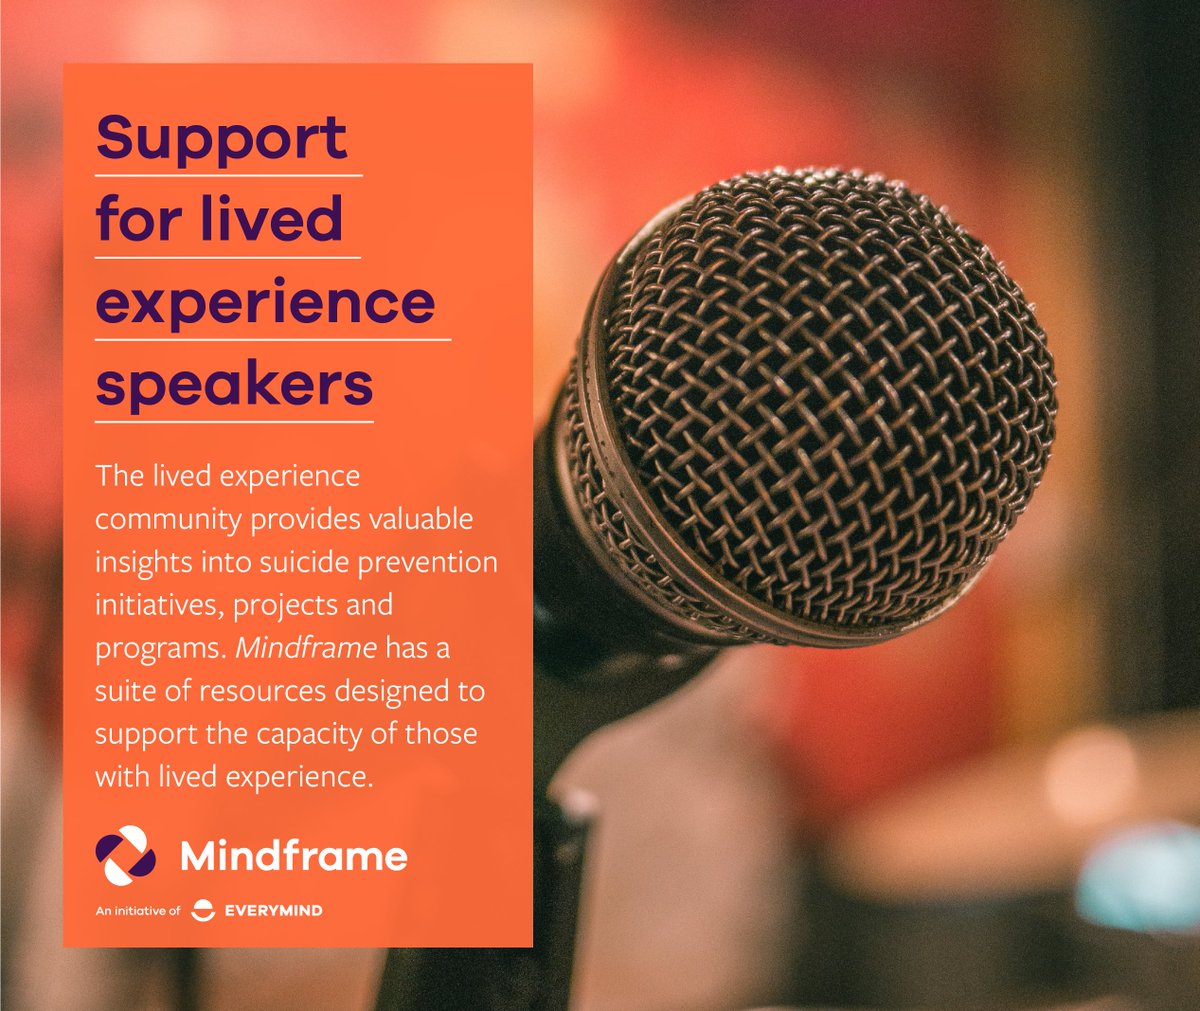 Mindframe is proud to support this week's @RosesInTheOcean #LESUMMIT23 Those taking in part are reminded that a suite of free resources designed to support lived experience speakers in various setting, including media interviews, is available. Read more: bit.ly/40aIegb